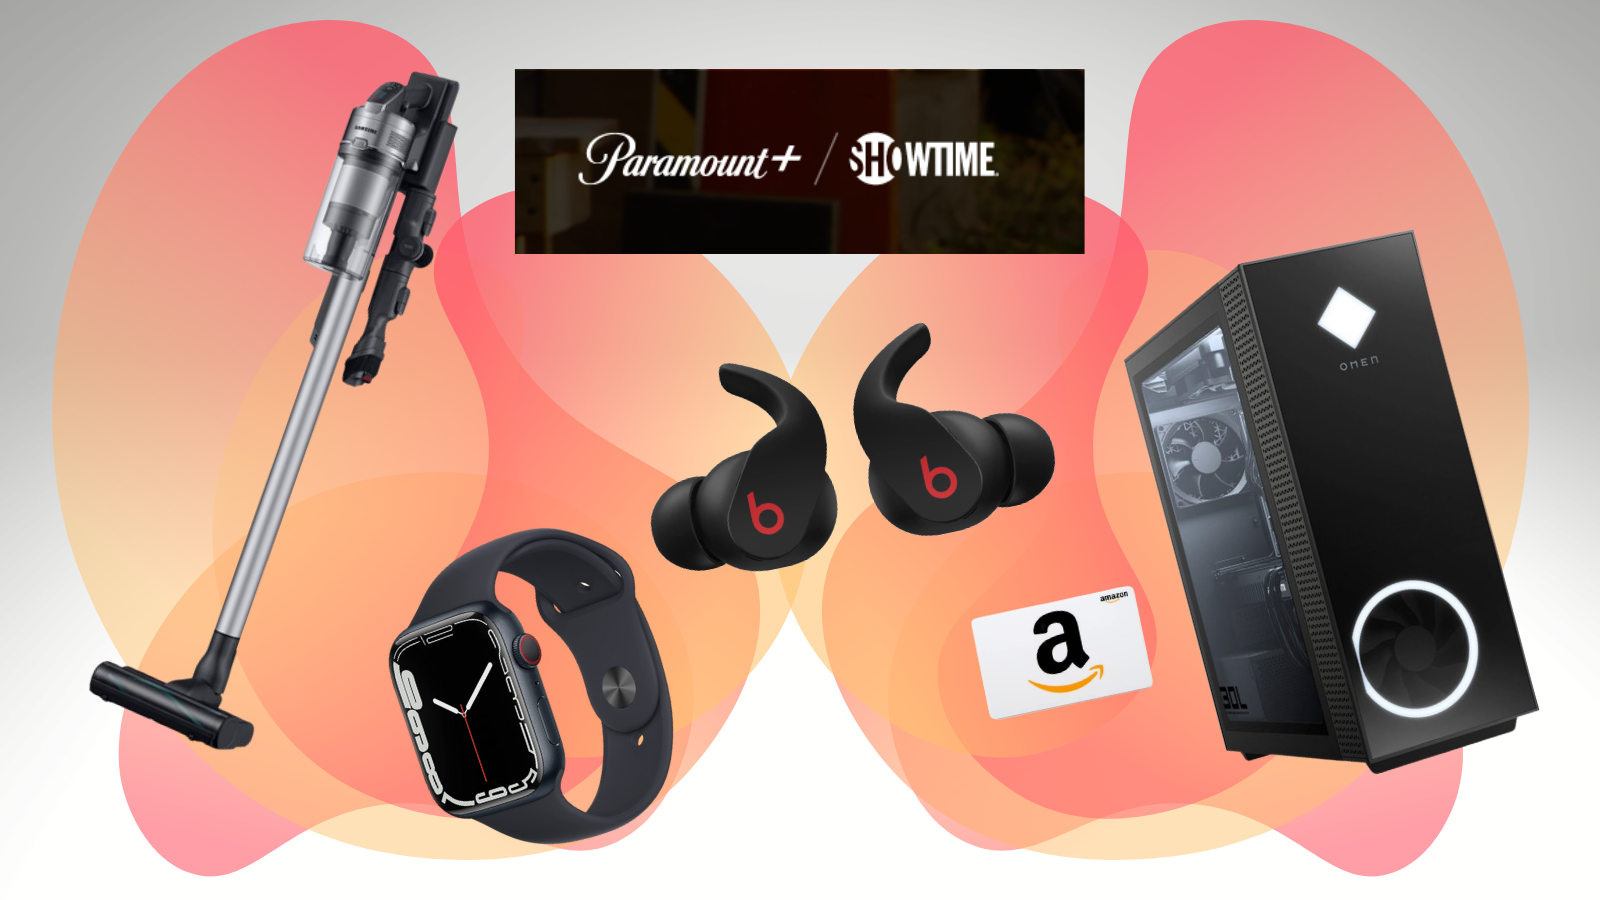 Today’s top deals include Paramount+ and Showtime bundles, the Samsung Jet 75 stick vacuum, the Beats Fit Pro, and more